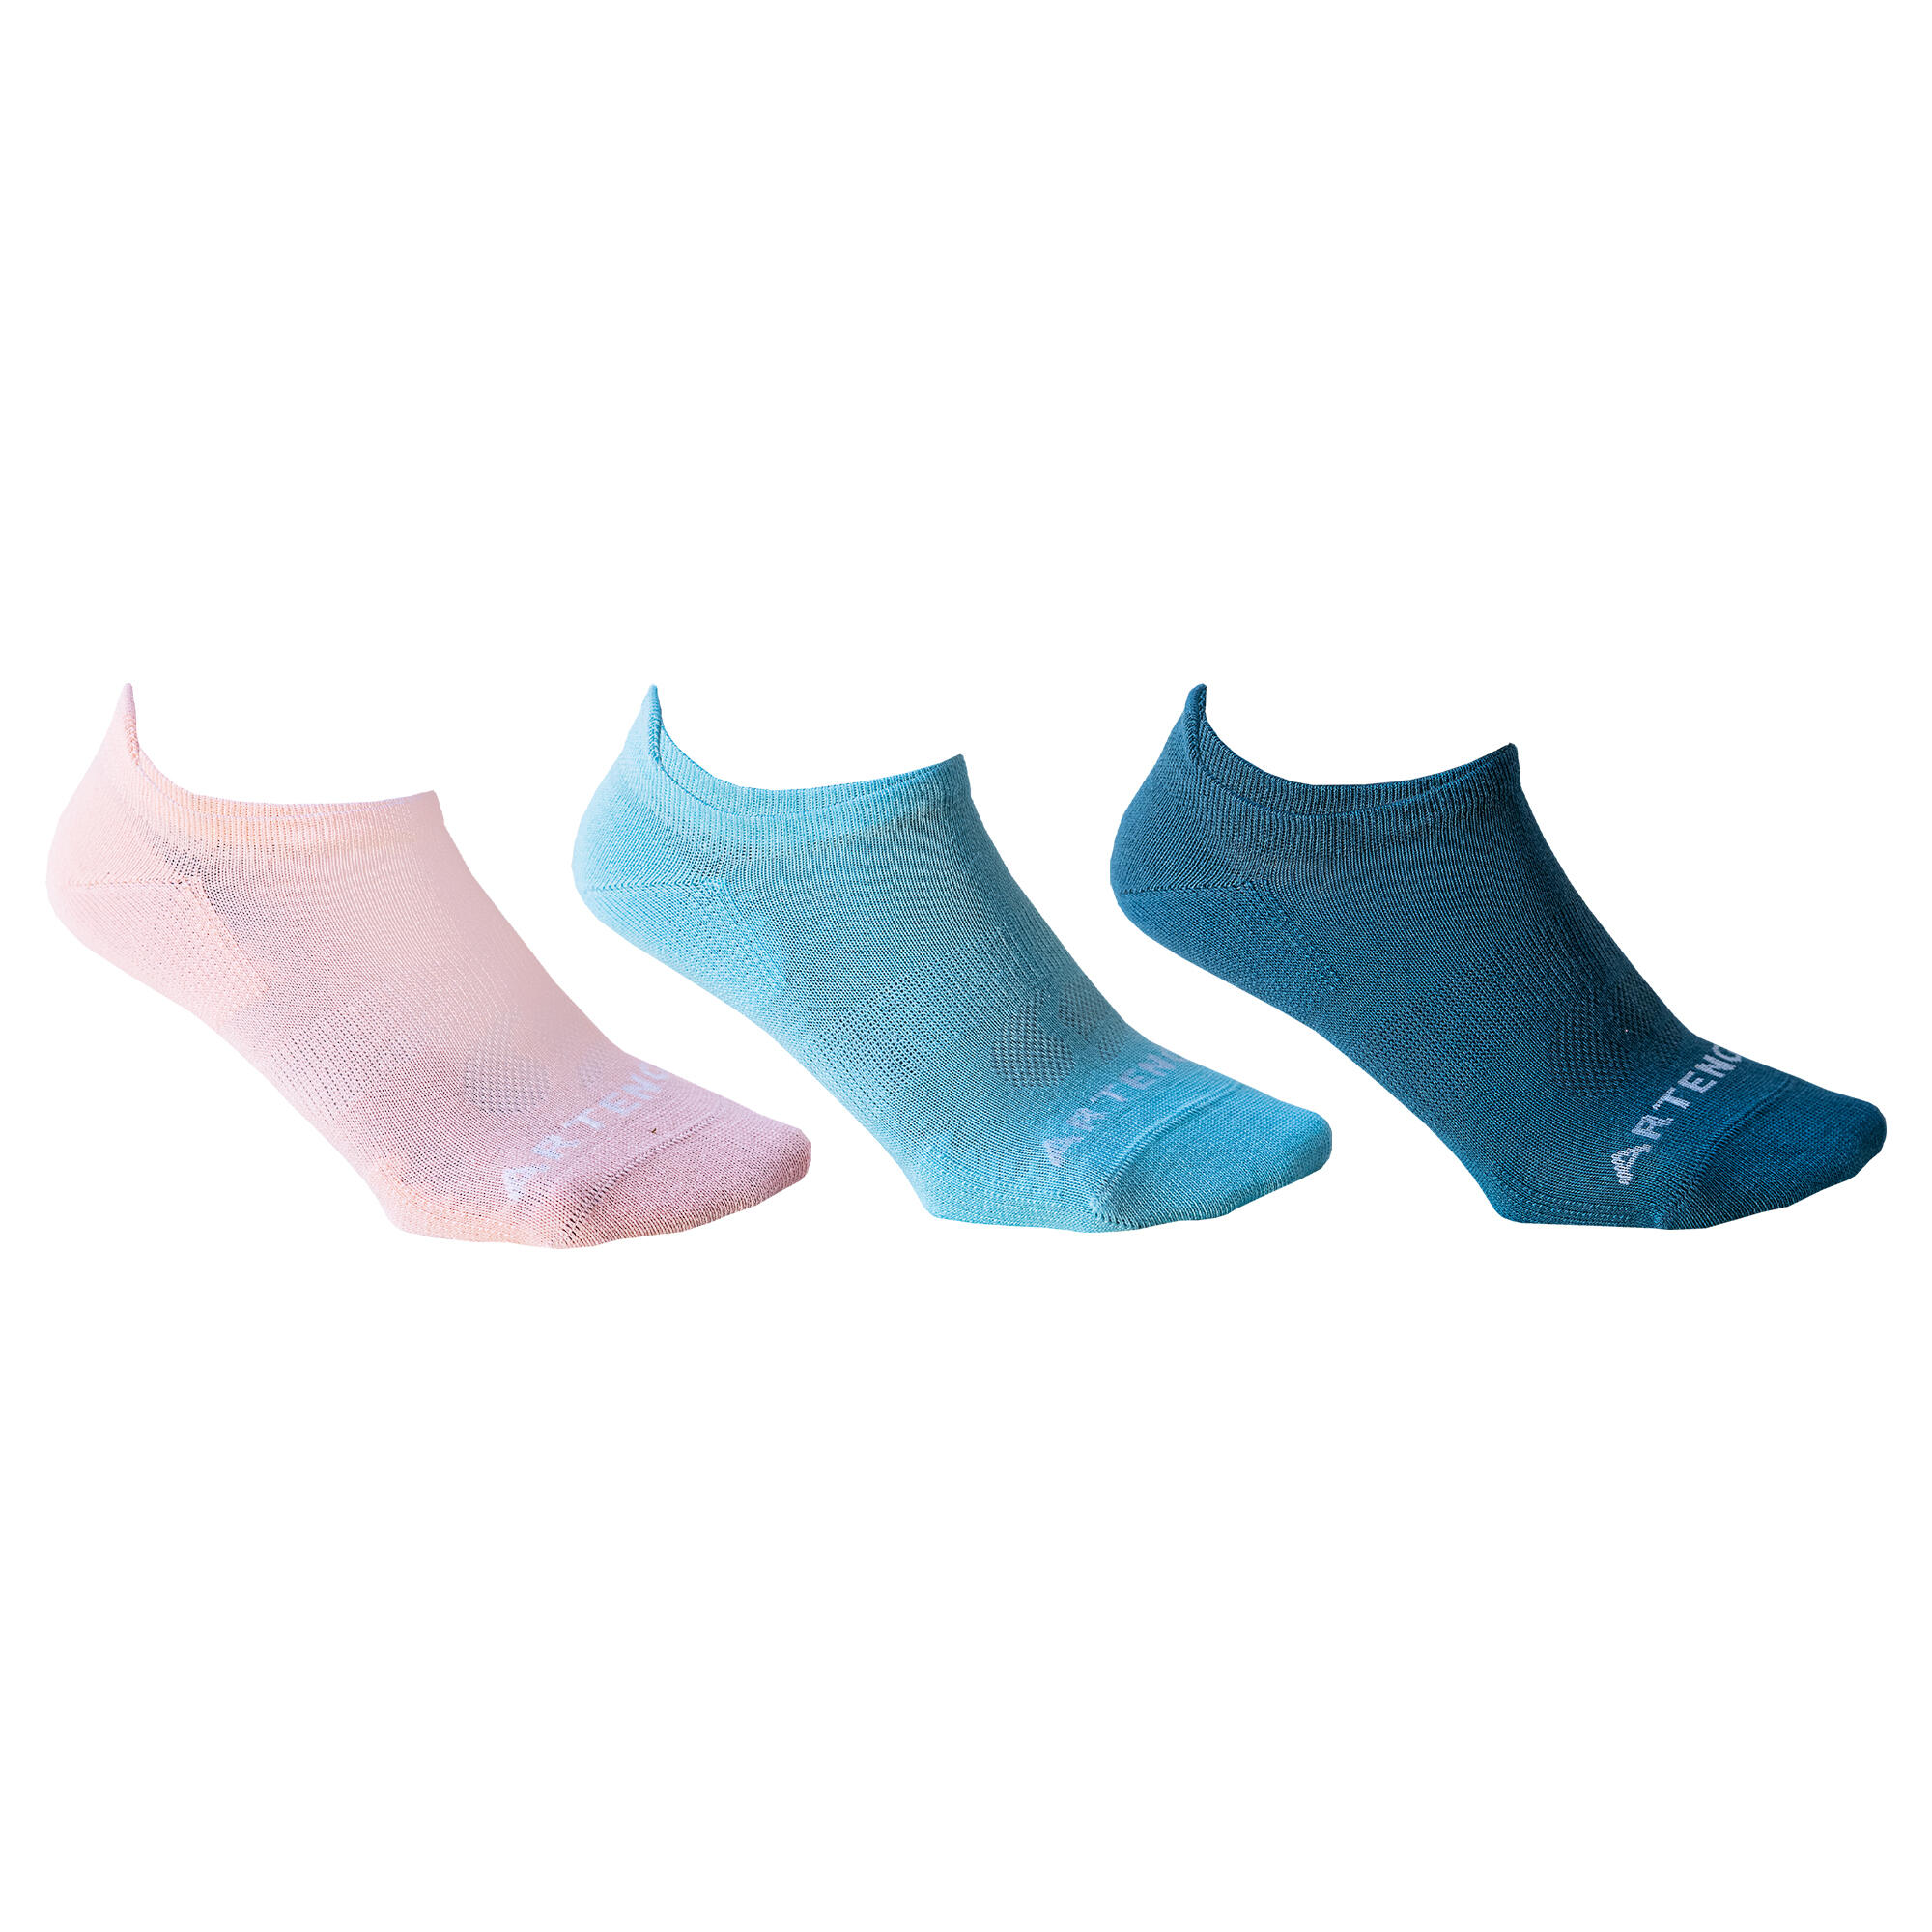 ARTENGO Low Sports Socks Tri-Pack RS 160 - Pink/Turquoise/Sky Blue